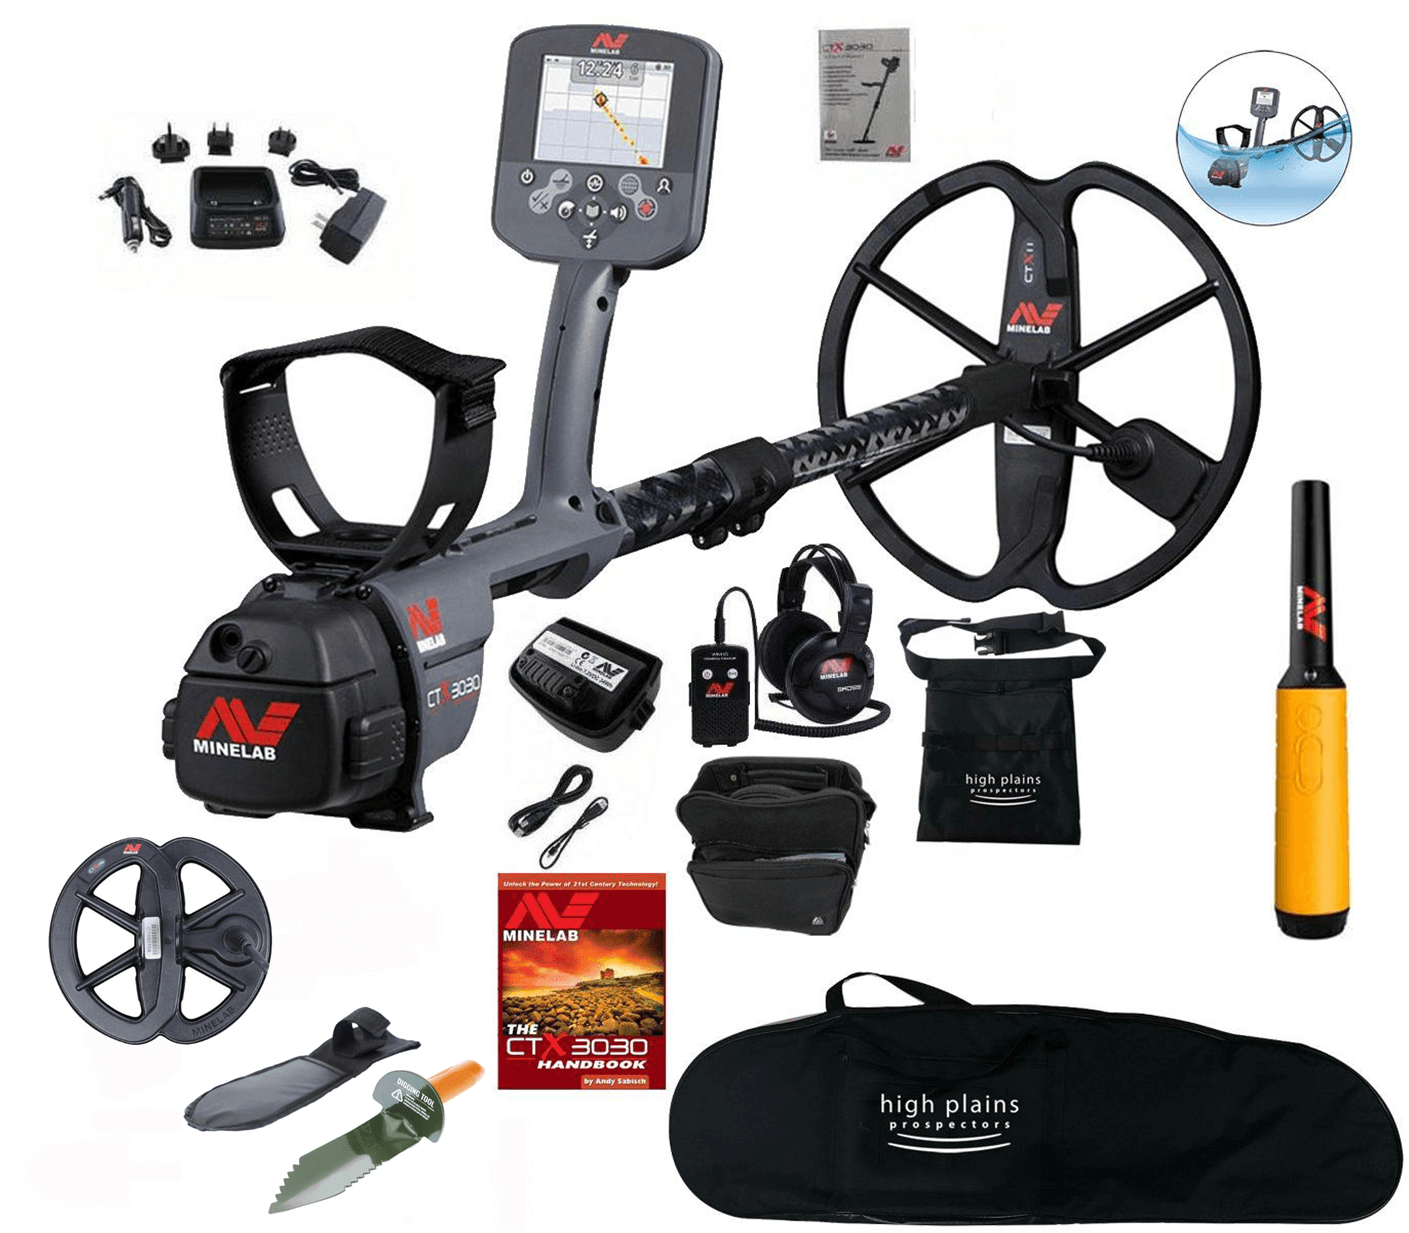 Minelab CTX 3030 Waterproof Metal Detector with Extra 6" Smart Coil, Pro Find 35, and FREE High Plains Gear